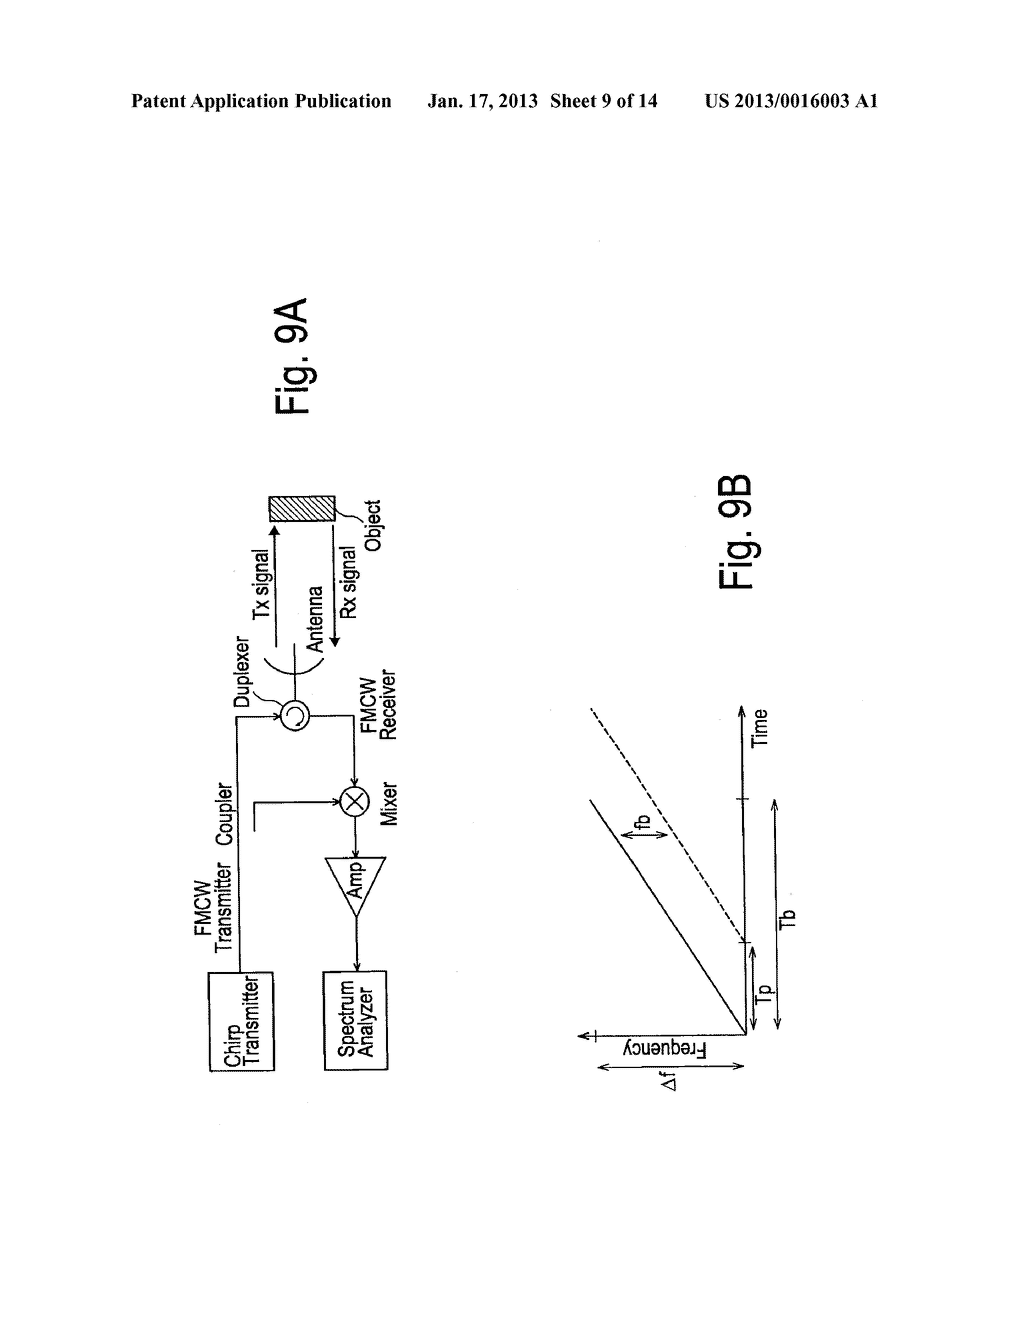 BEAM FORMING DEVICE AND METHOD USING FREQUENCY-DEPENDENT CALIBRATIONAANM STIRLING-GALLACHER; RichardAACI DallasAAST TXAACO USAAGP STIRLING-GALLACHER; Richard Dallas TX USAANM TESTAR; MiquelAACI StuttgartAACO DEAAGP TESTAR; Miquel Stuttgart DEAANM DAYI; FurkanAACI StuttgartAACO DEAAGP DAYI; Furkan Stuttgart DEAANM BOEHNKE; RalfAACI EsslingenAACO DEAAGP BOEHNKE; Ralf Esslingen DEAANM BLECH; MarcelAACI HerrenbergAACO DEAAGP BLECH; Marcel Herrenberg DEAANM WANG; QiAACI StuttgartAACO DEAAGP WANG; Qi Stuttgart DE - diagram, schematic, and image 10